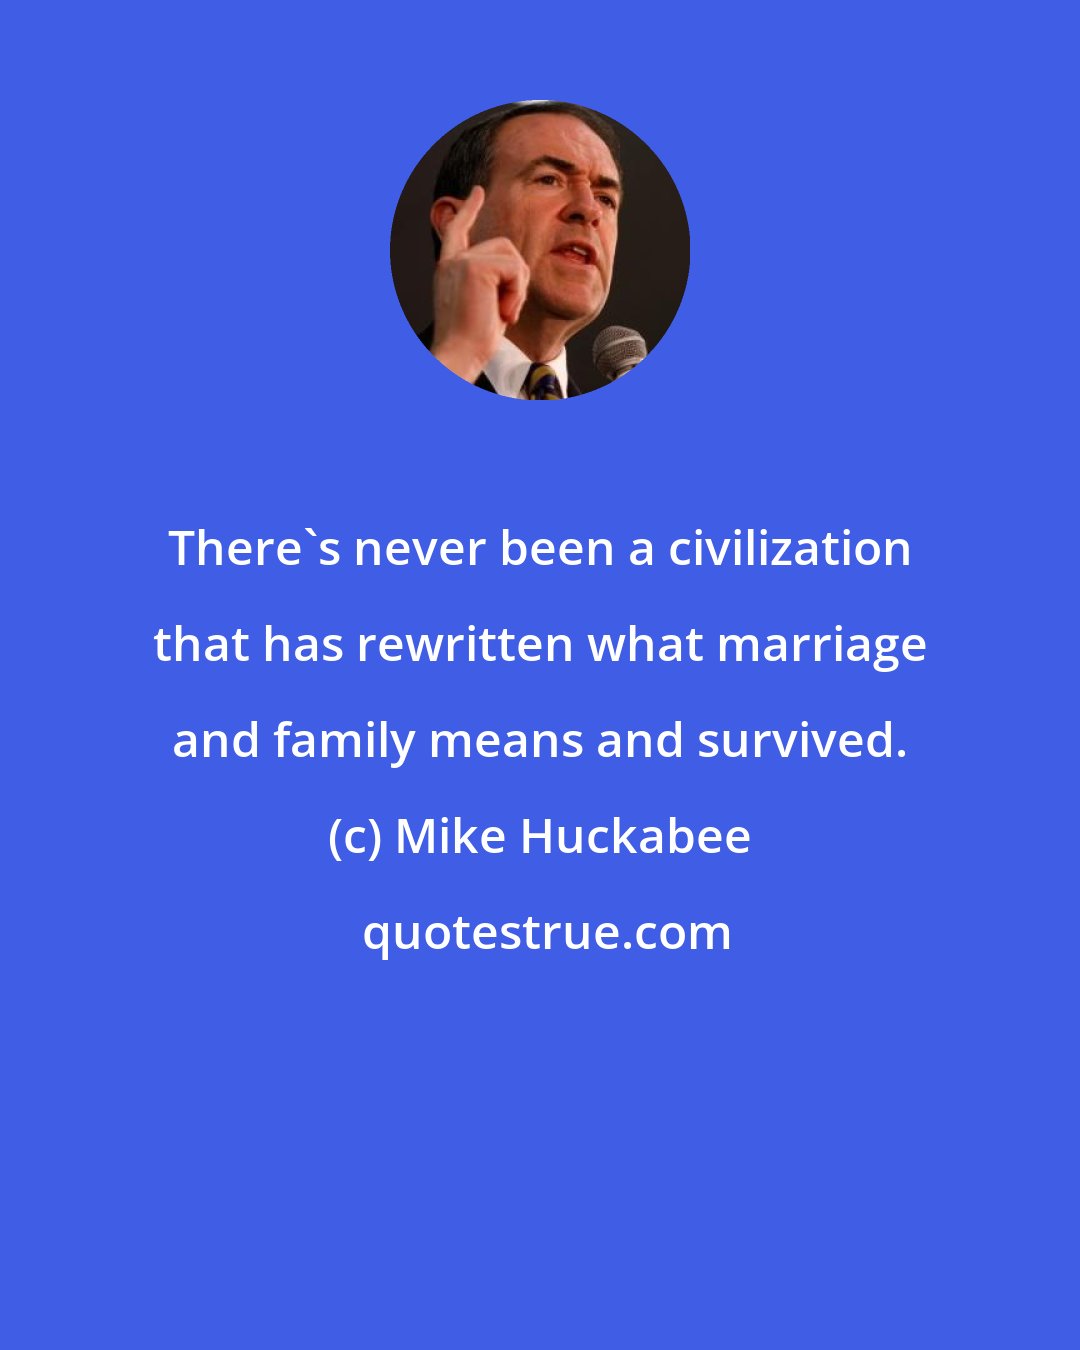 Mike Huckabee: There's never been a civilization that has rewritten what marriage and family means and survived.